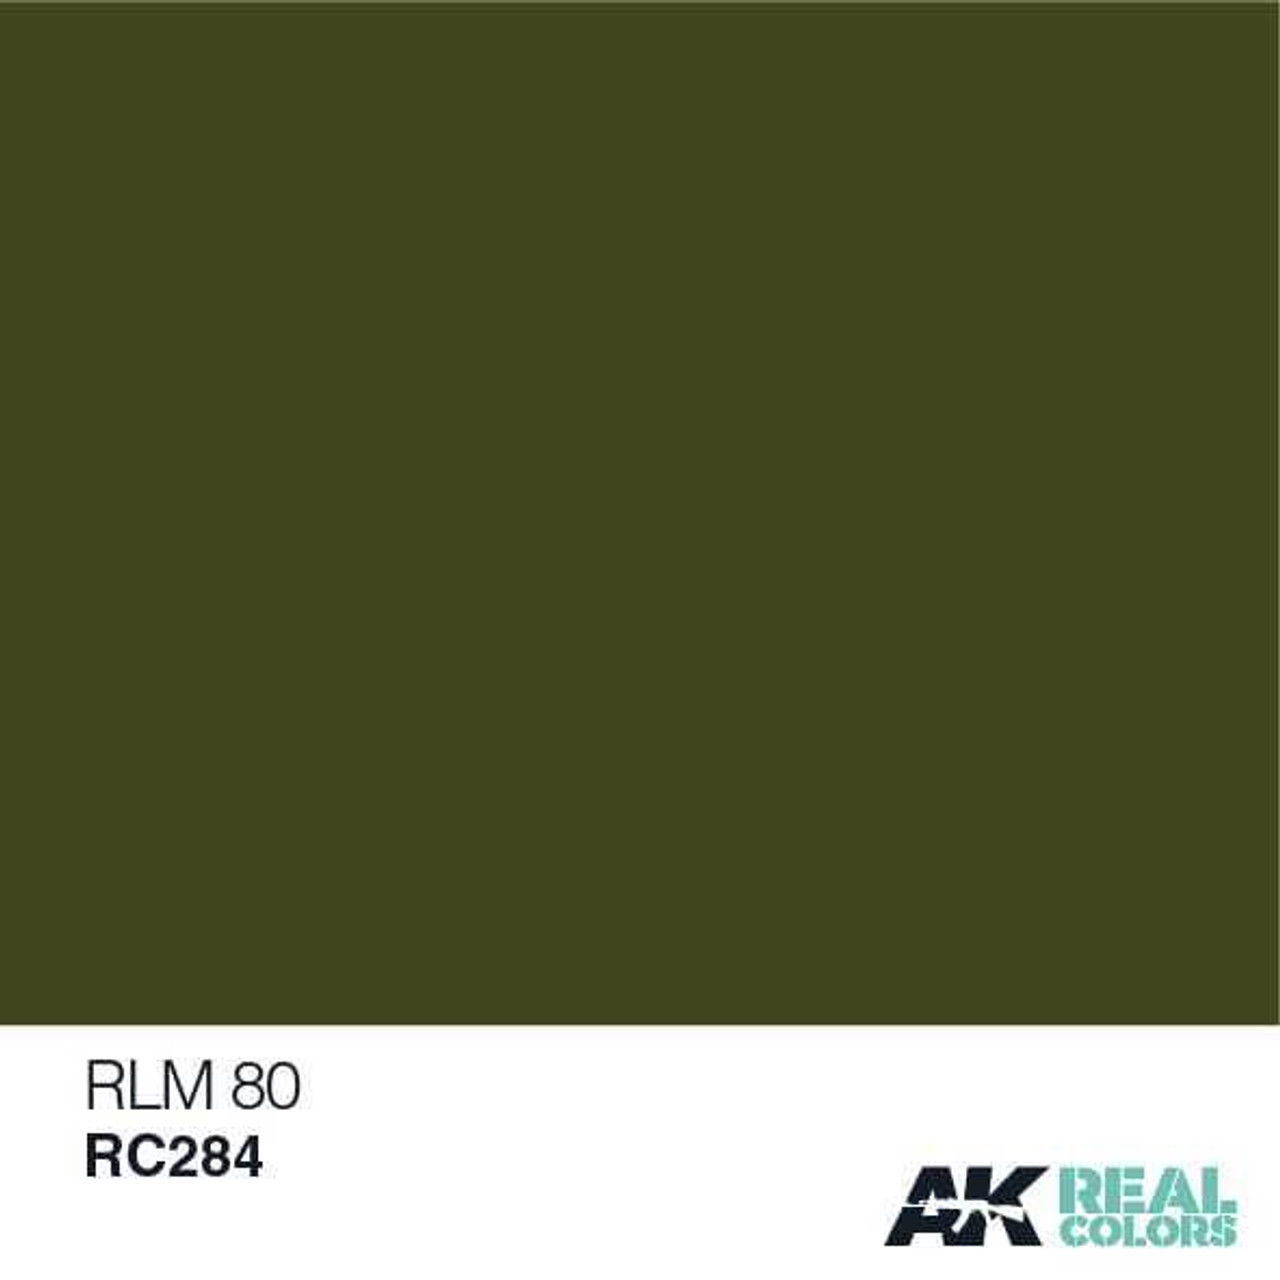 AKIRC284 Real Colors  RLM 80 Acrylic Lacquer Paint 10ml Bottle